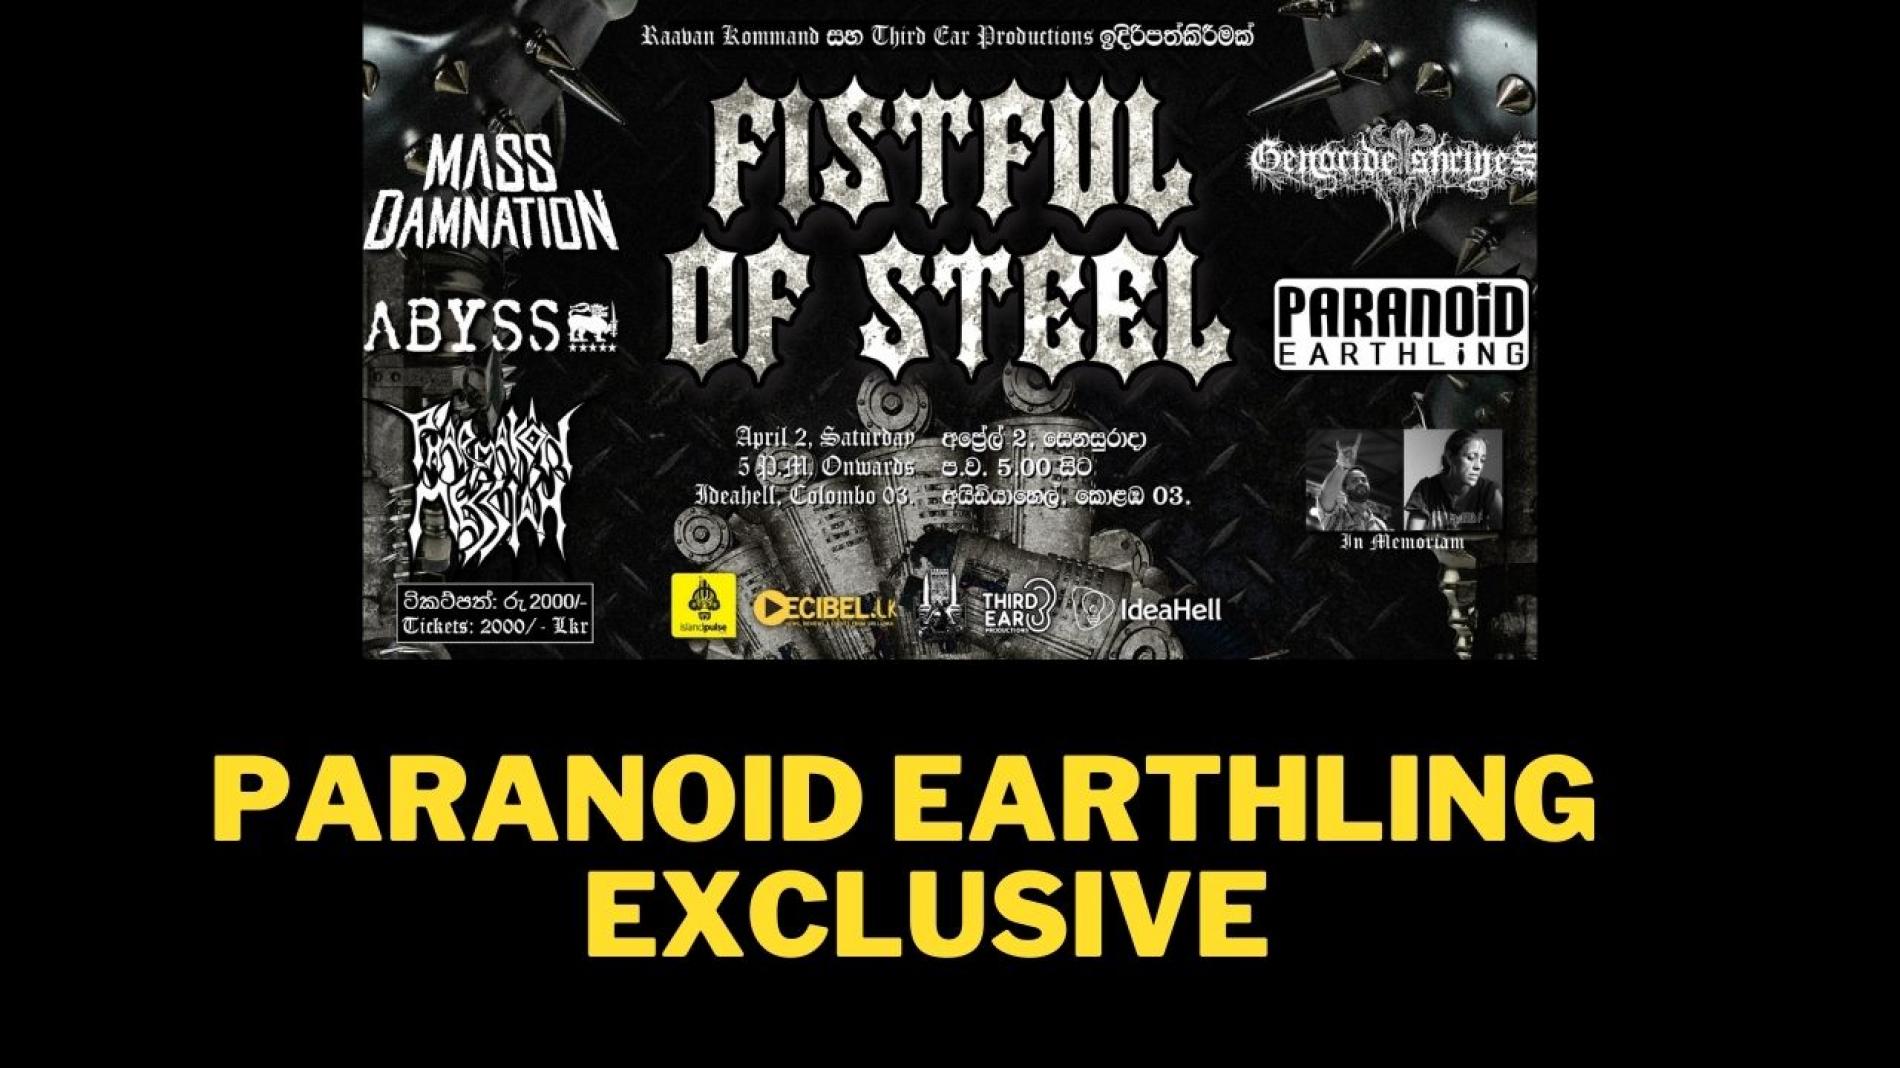 News : Paranoid Earthling Set To Play @ Fistful Of Steel!